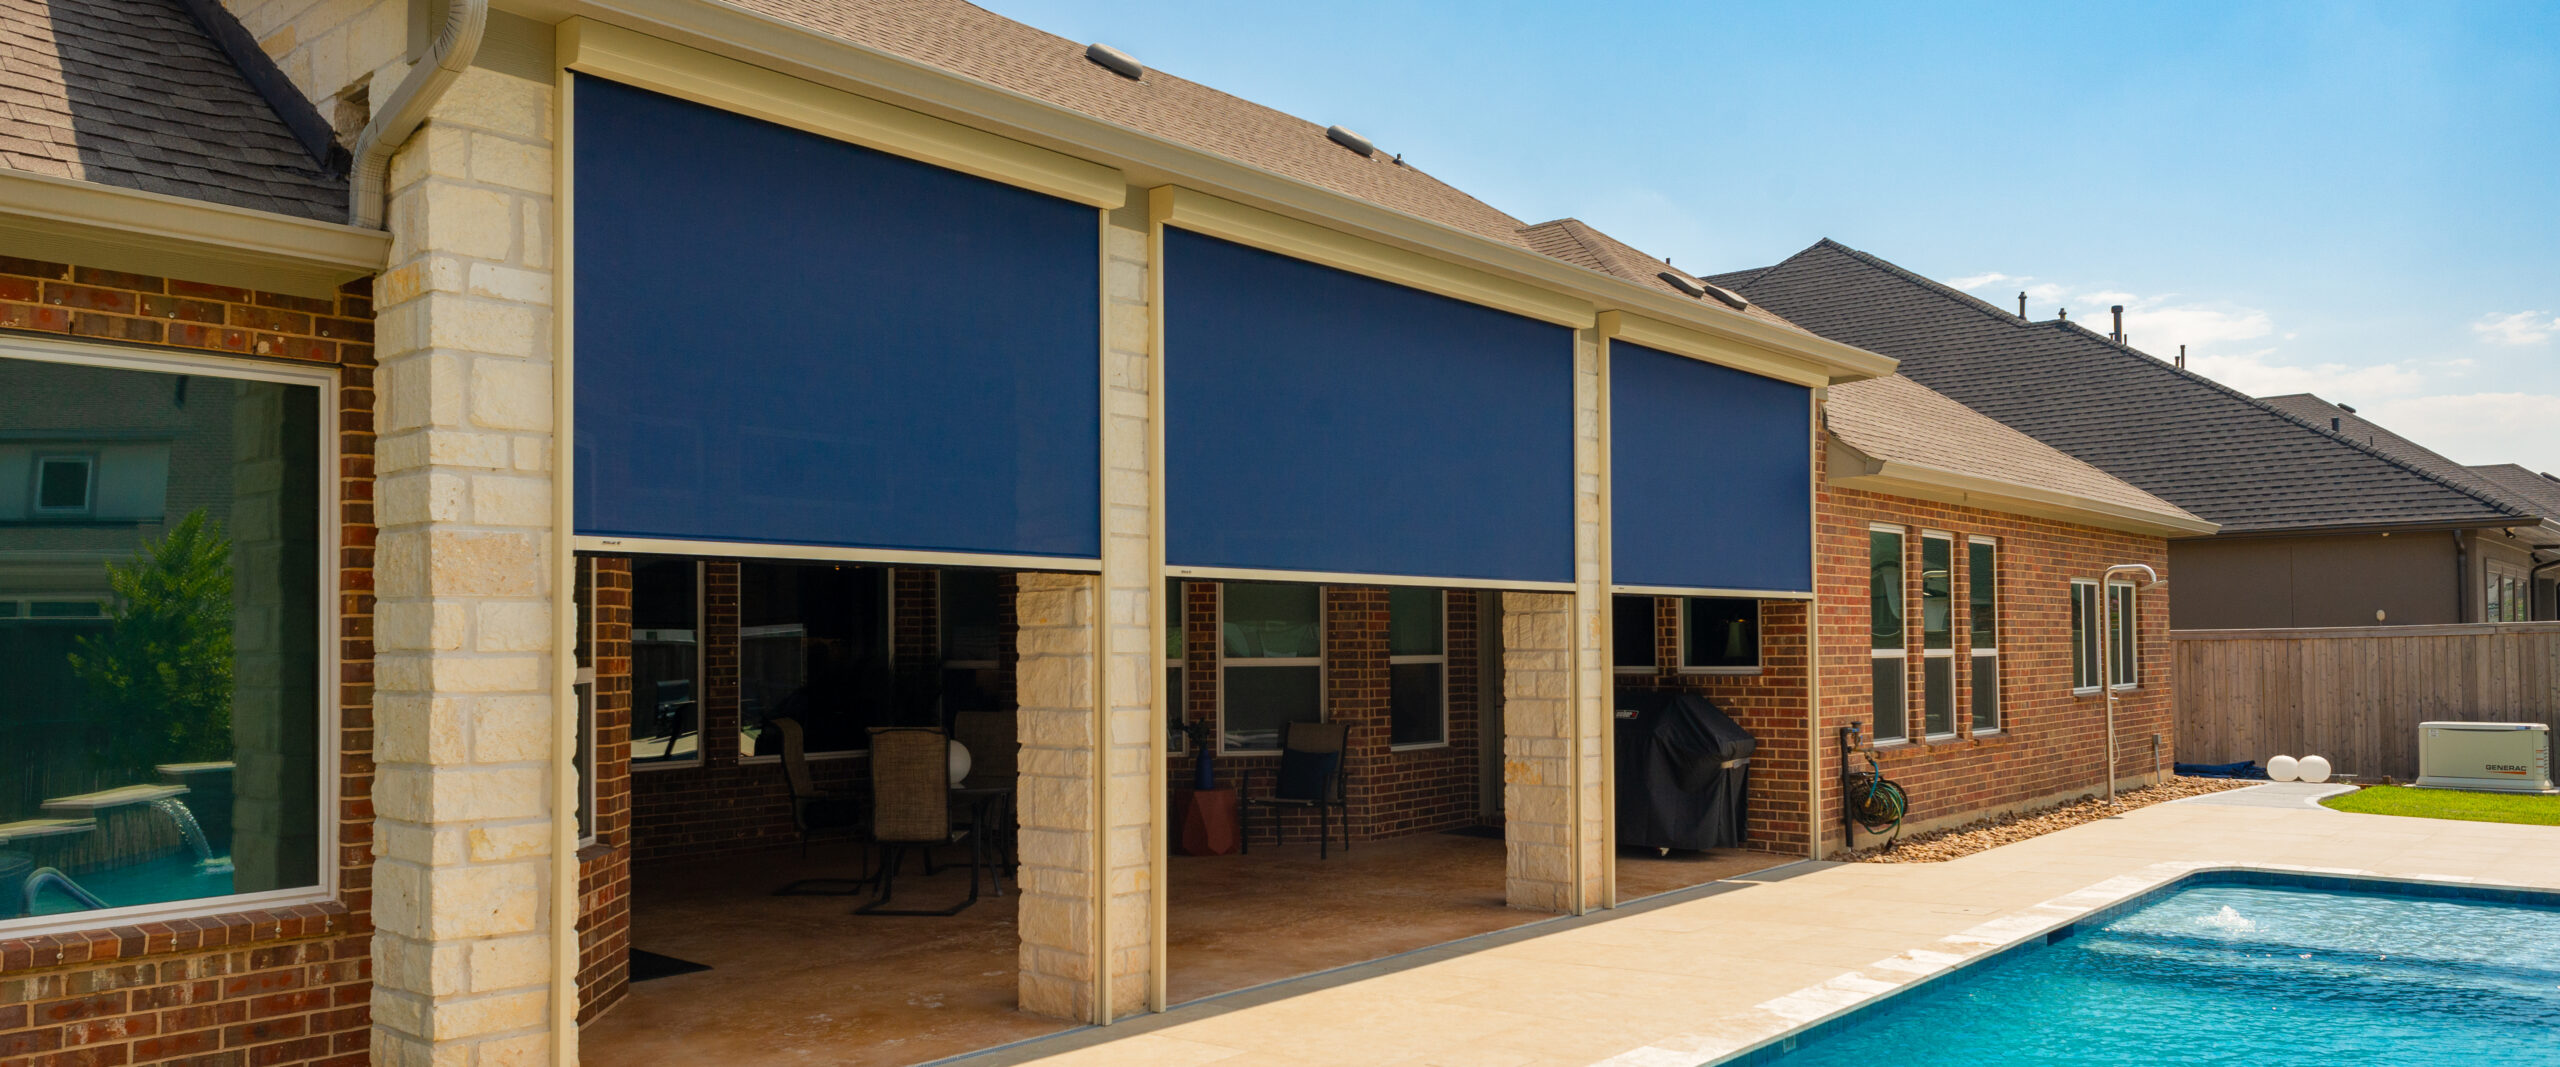 External View of Blue Patio Shades Installed at a House with Pool